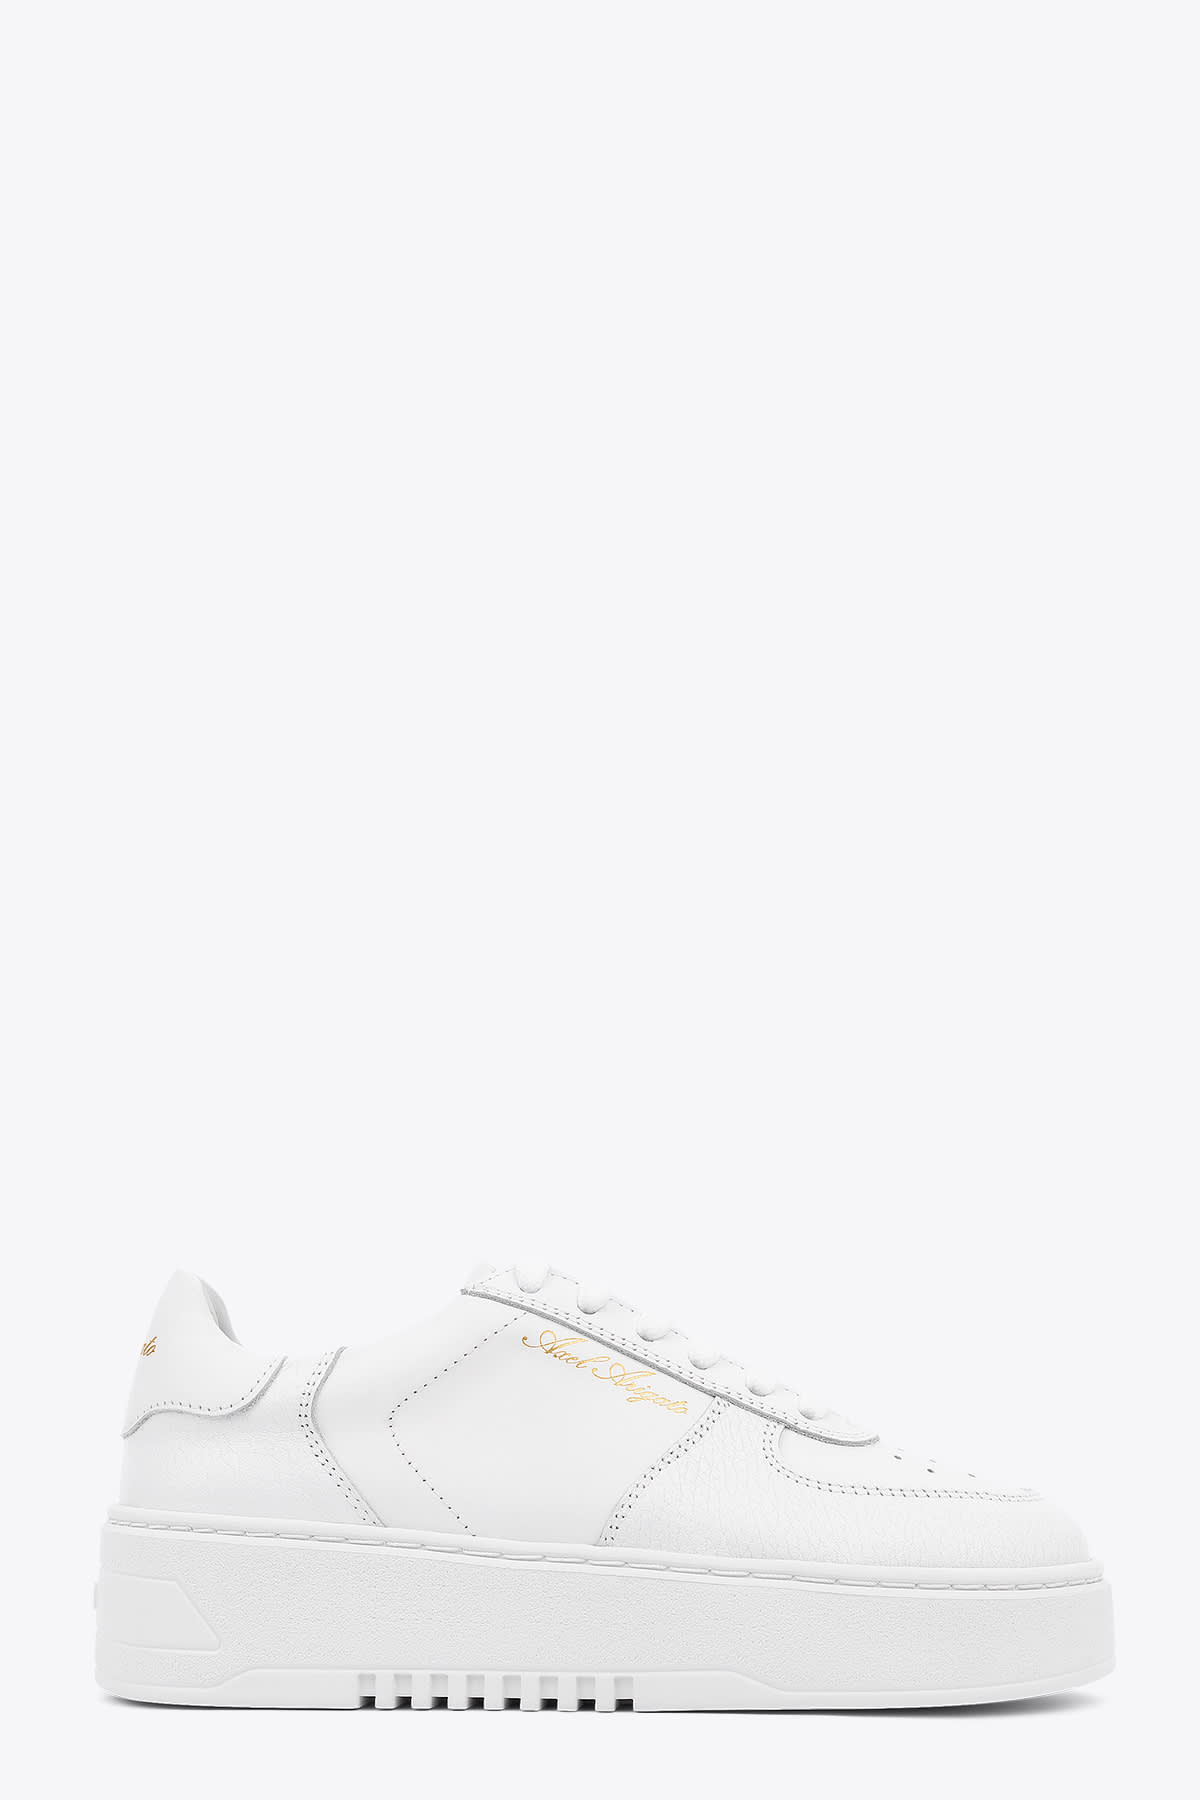 Axel Arigato Orbit White leather low-top lace up sneakers - Orbit